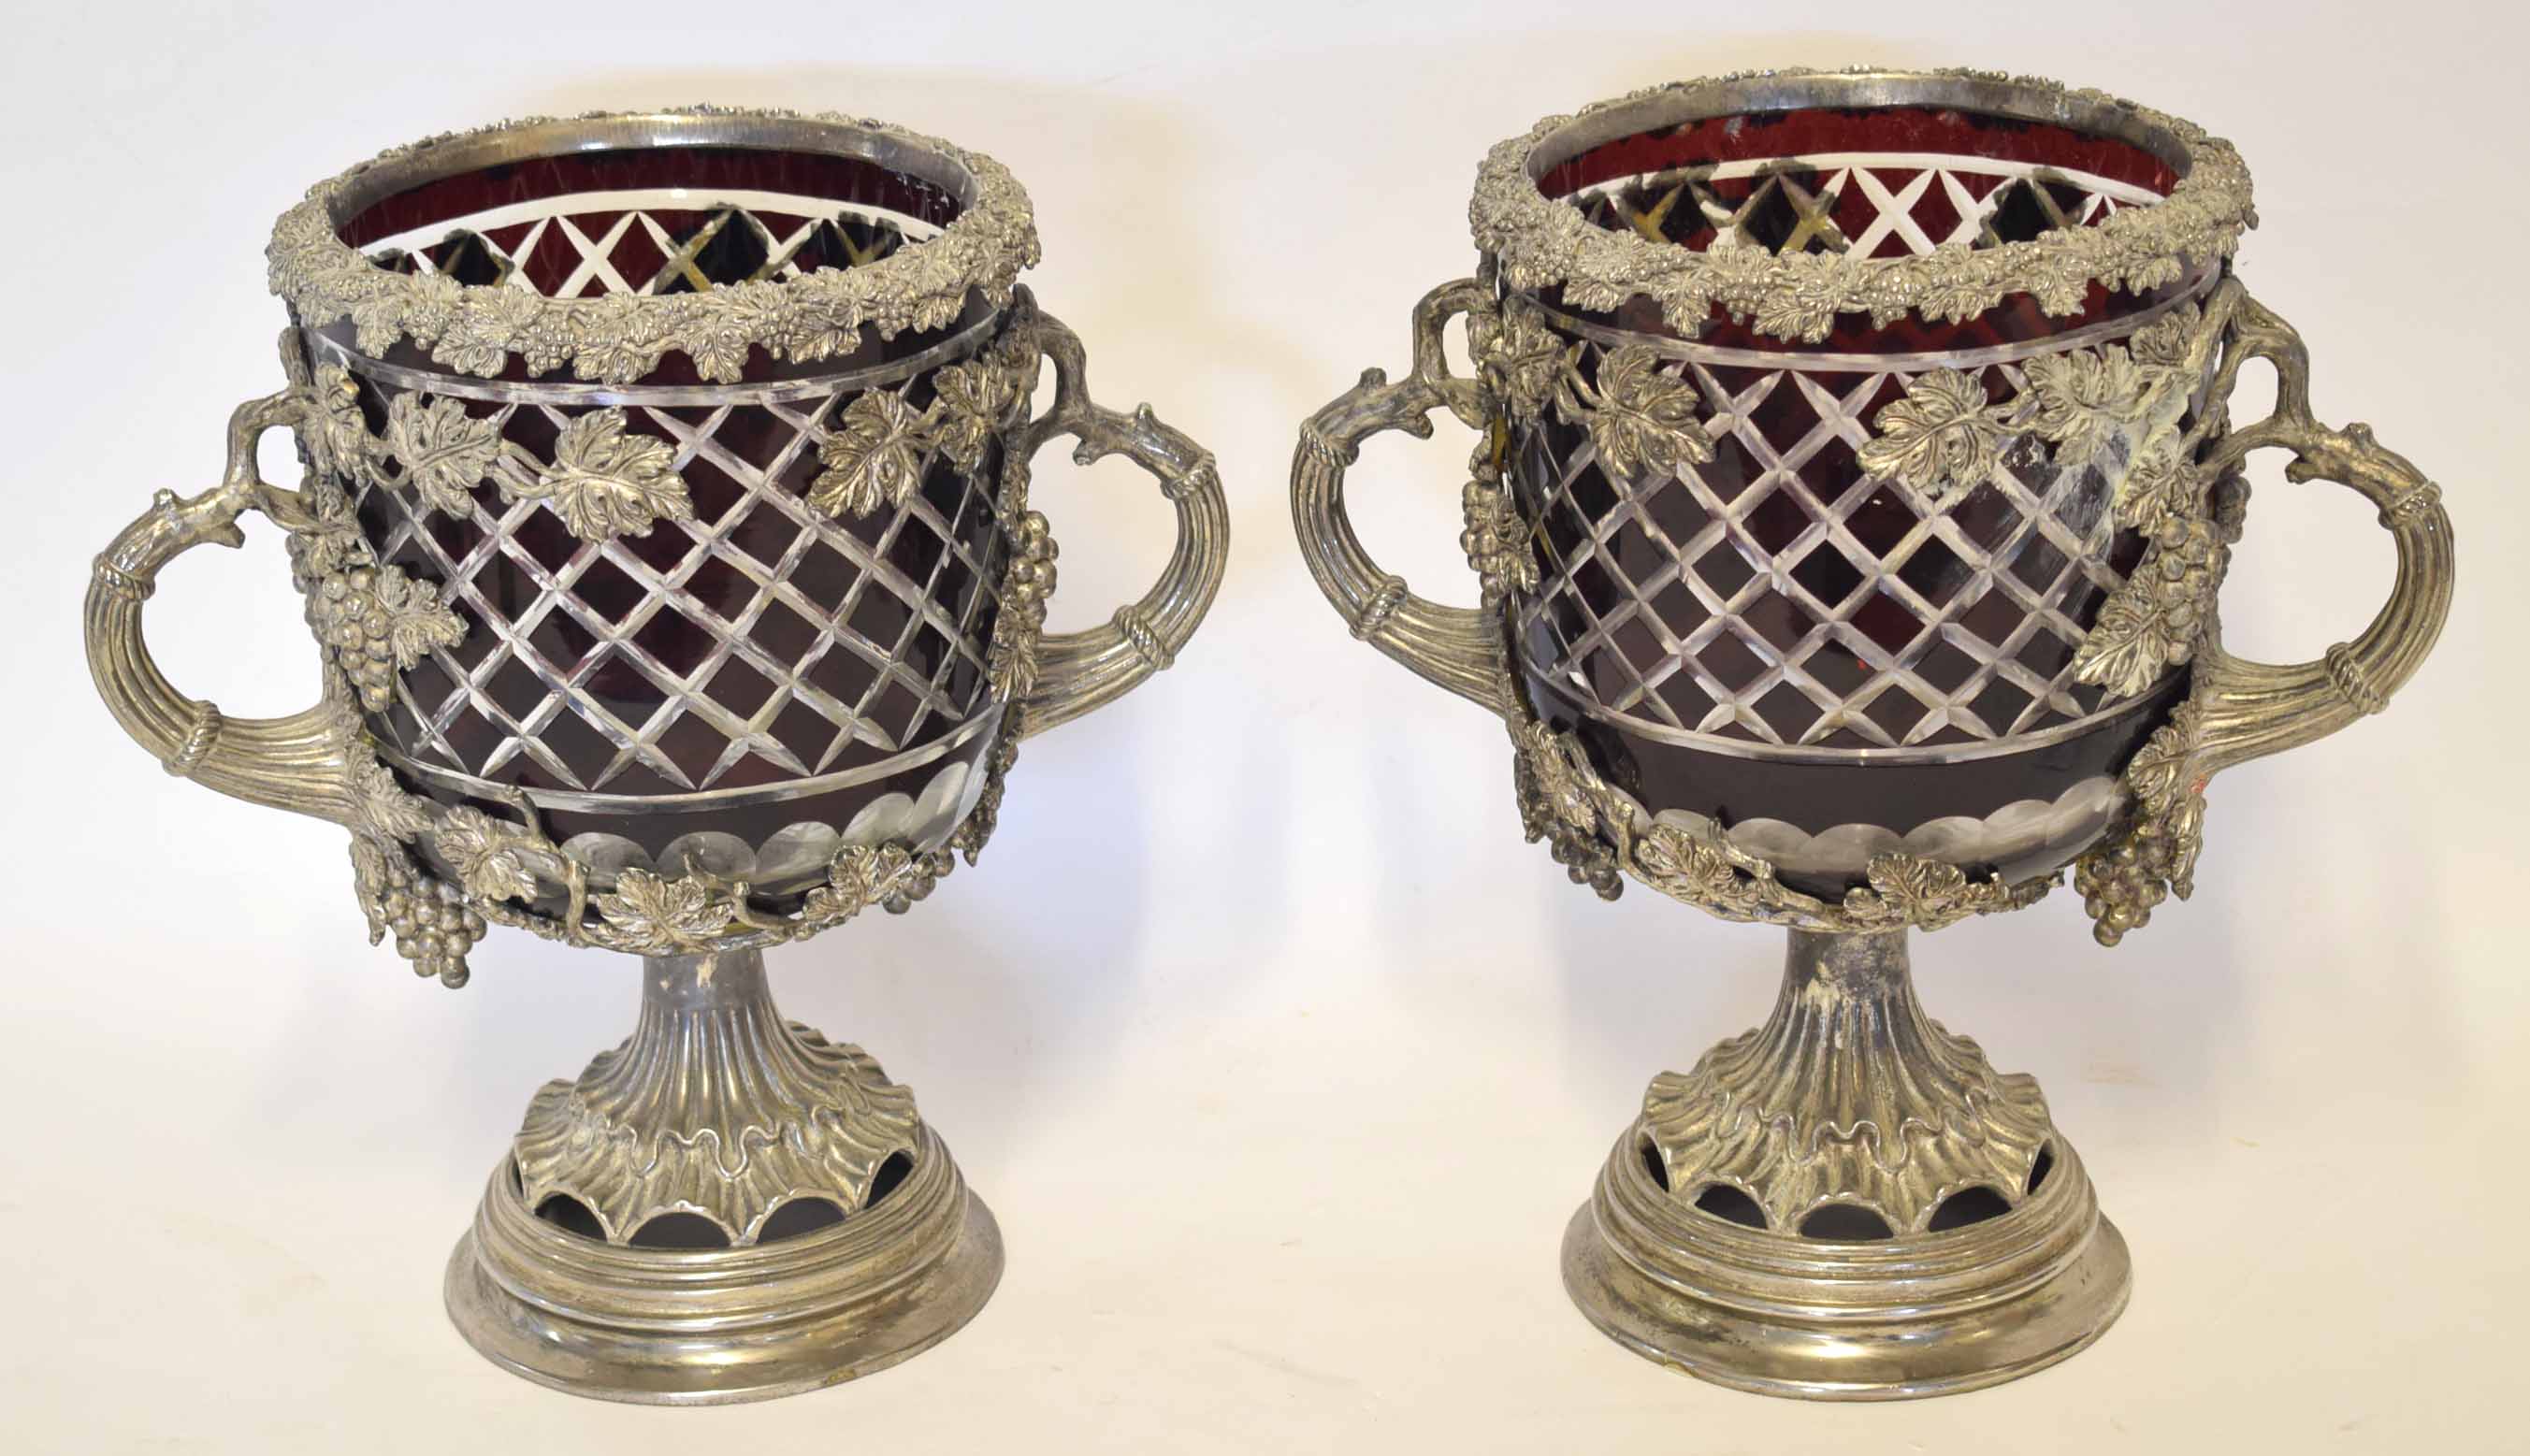 Pair of wine coolers, the cranberry style body with an overlaid silver metal decoration of grapes